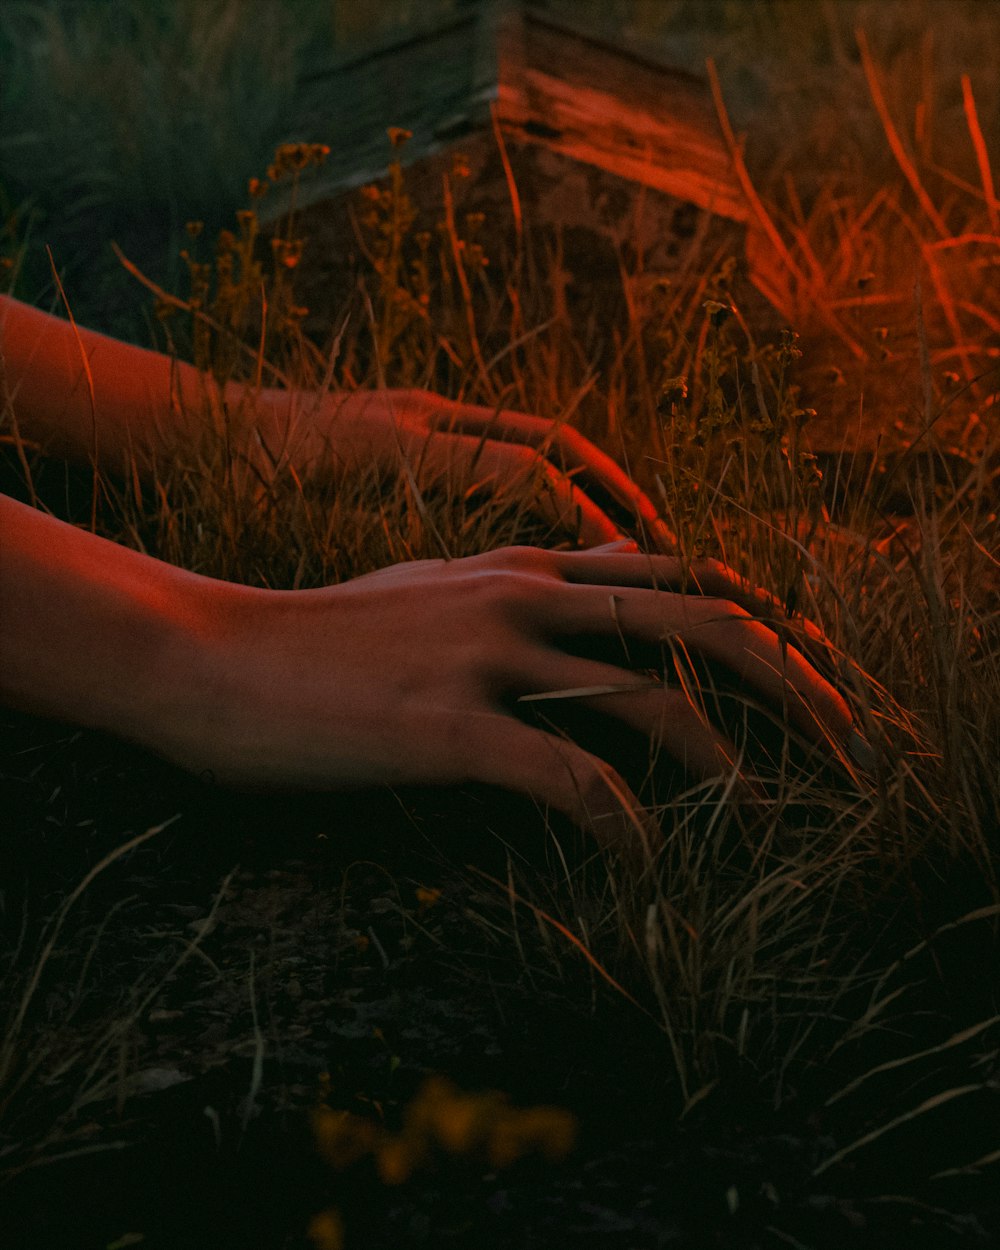 a person's hand resting on the ground in the grass